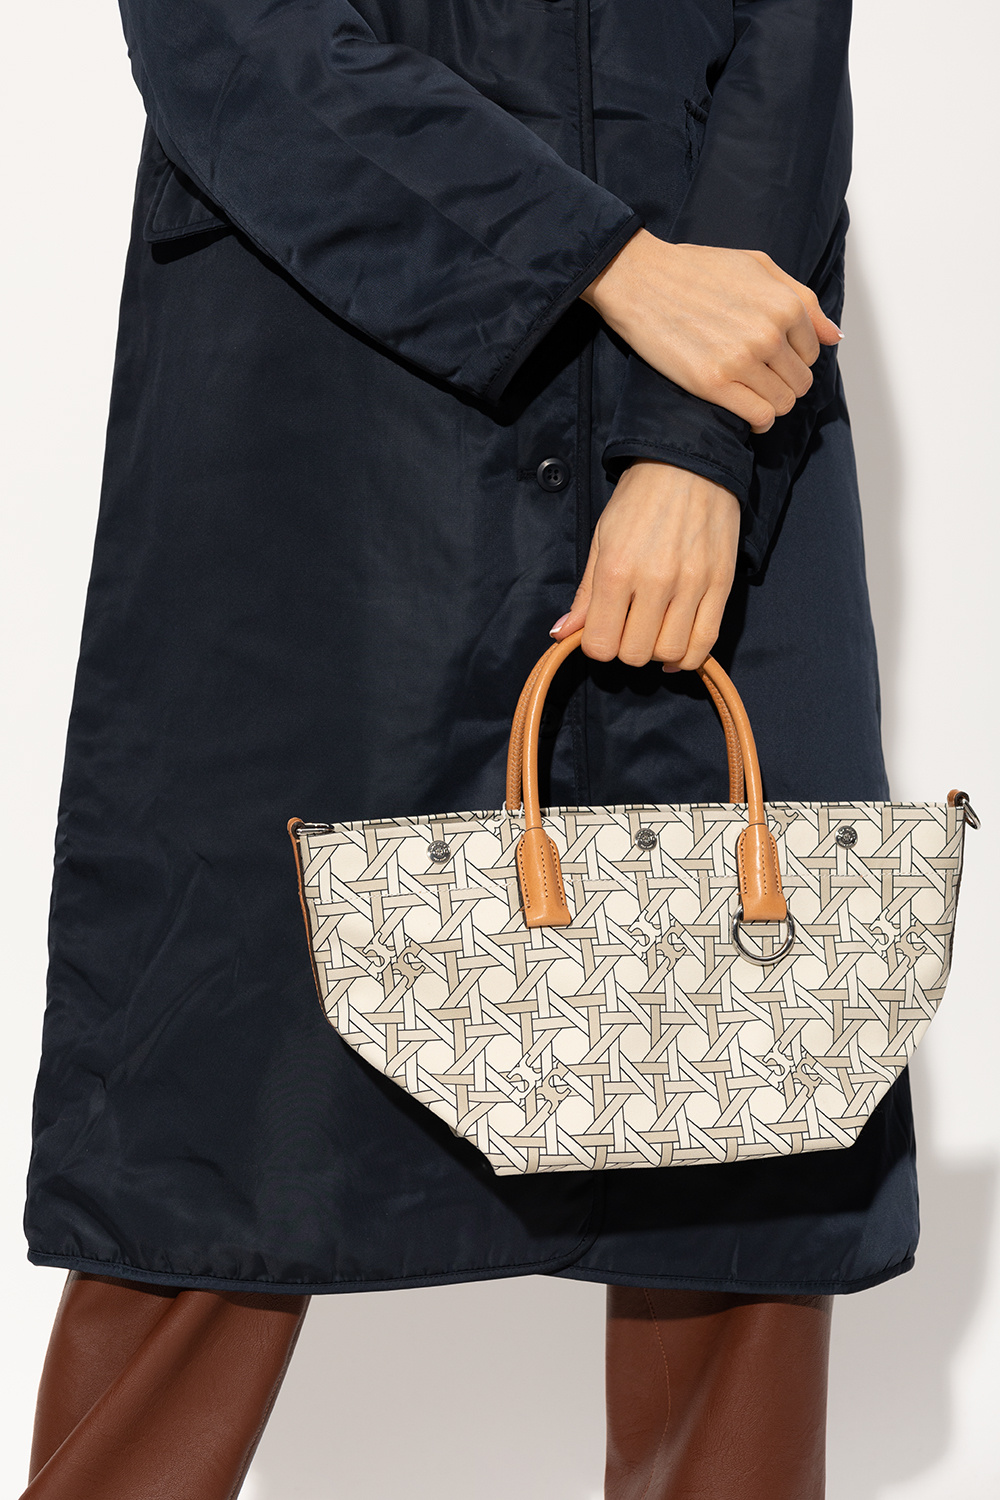 Tory Burch Navy Blue/Beige Coated Canvas T Monogram Tote Tory Burch